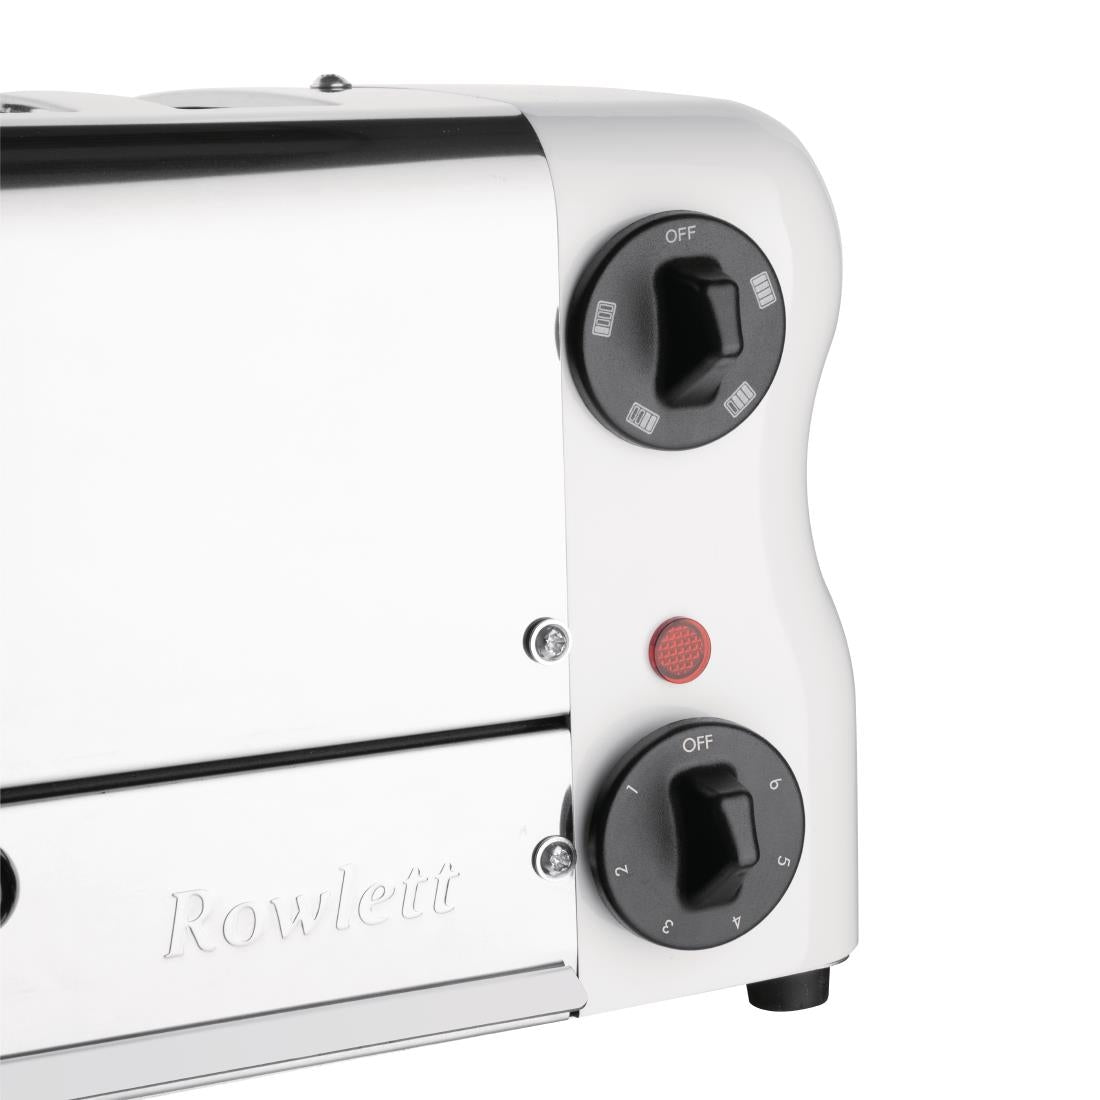 CH182 Rowlett Esprit 4 Slot Toaster White w/2x Additional Elements & Sandwich Cage JD Catering Equipment Solutions Ltd